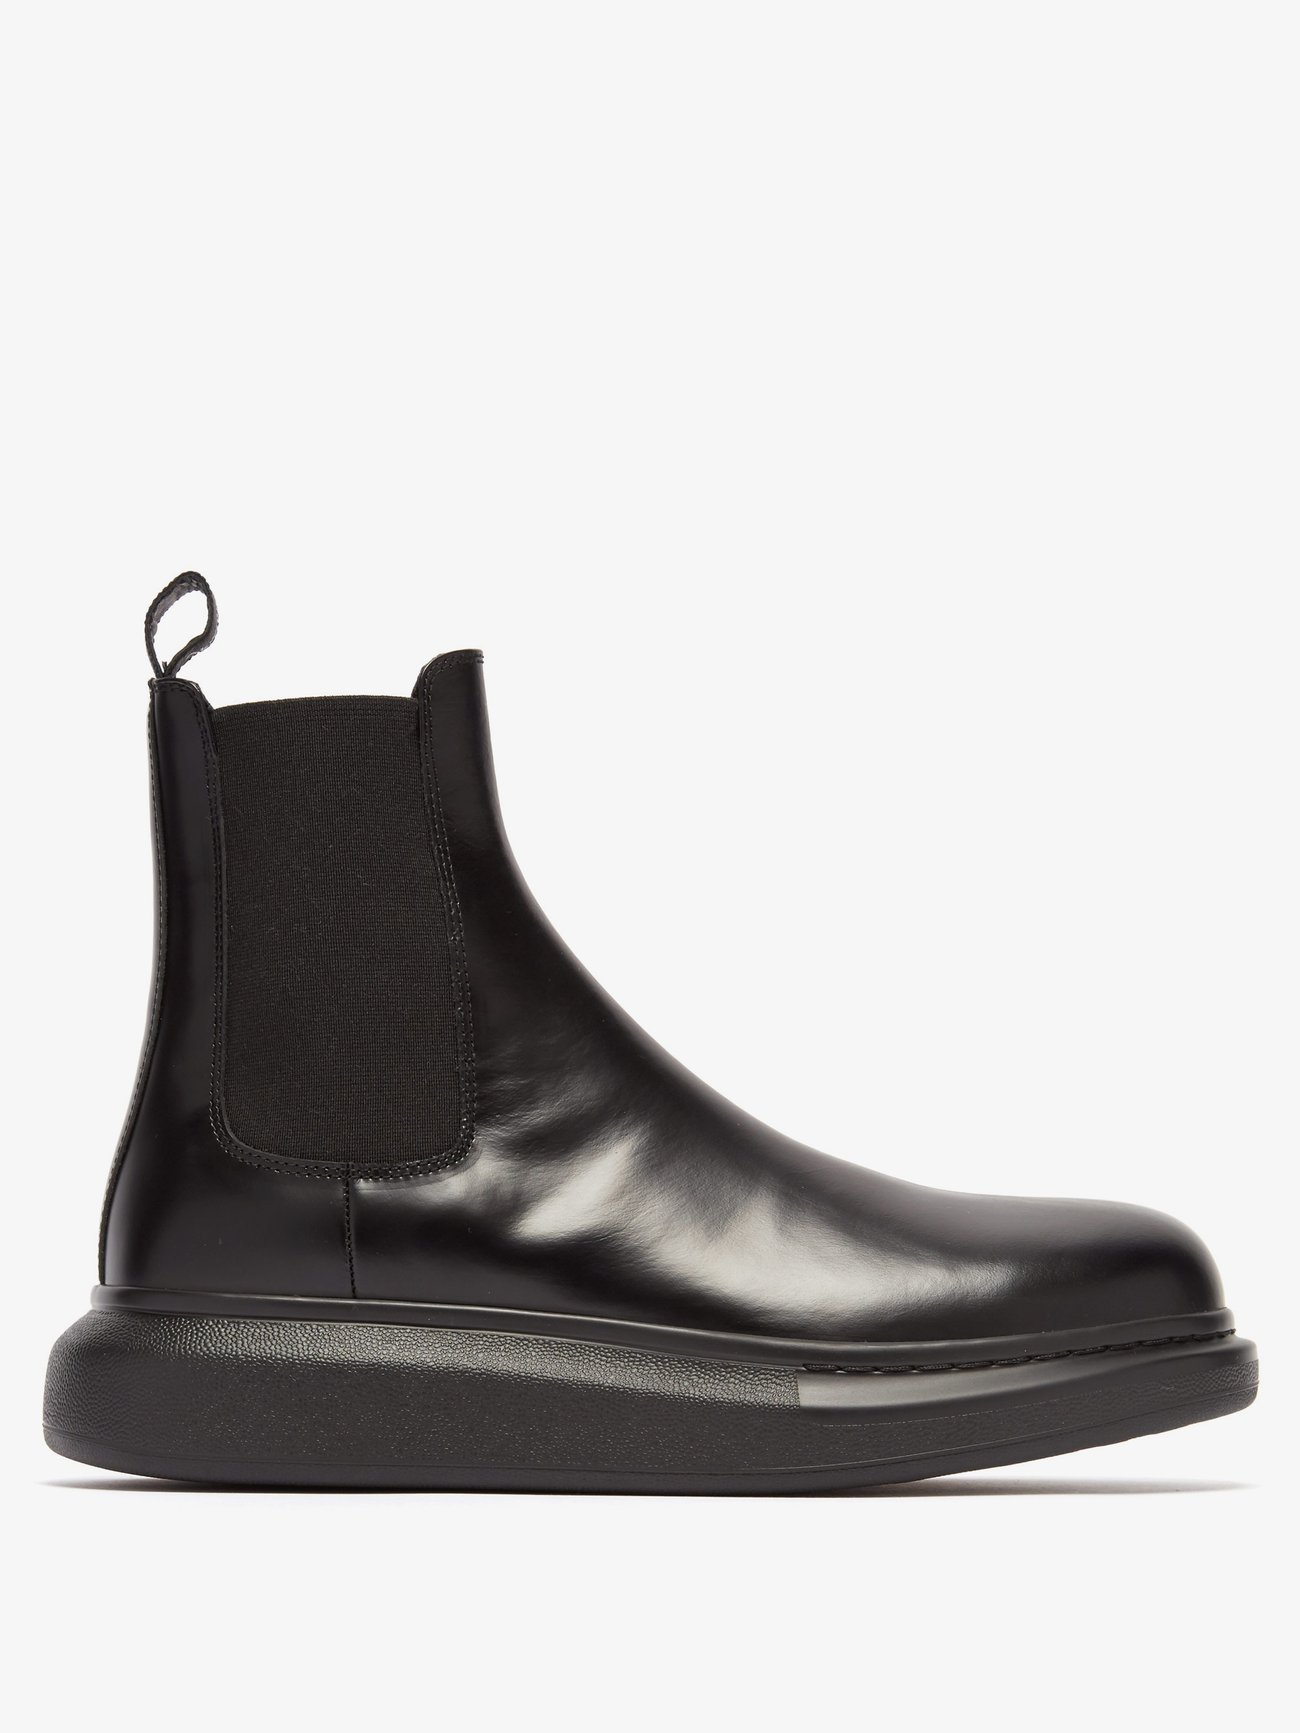 Black Exaggerated sole leather Chelsea boots | Alexander McQueen ...